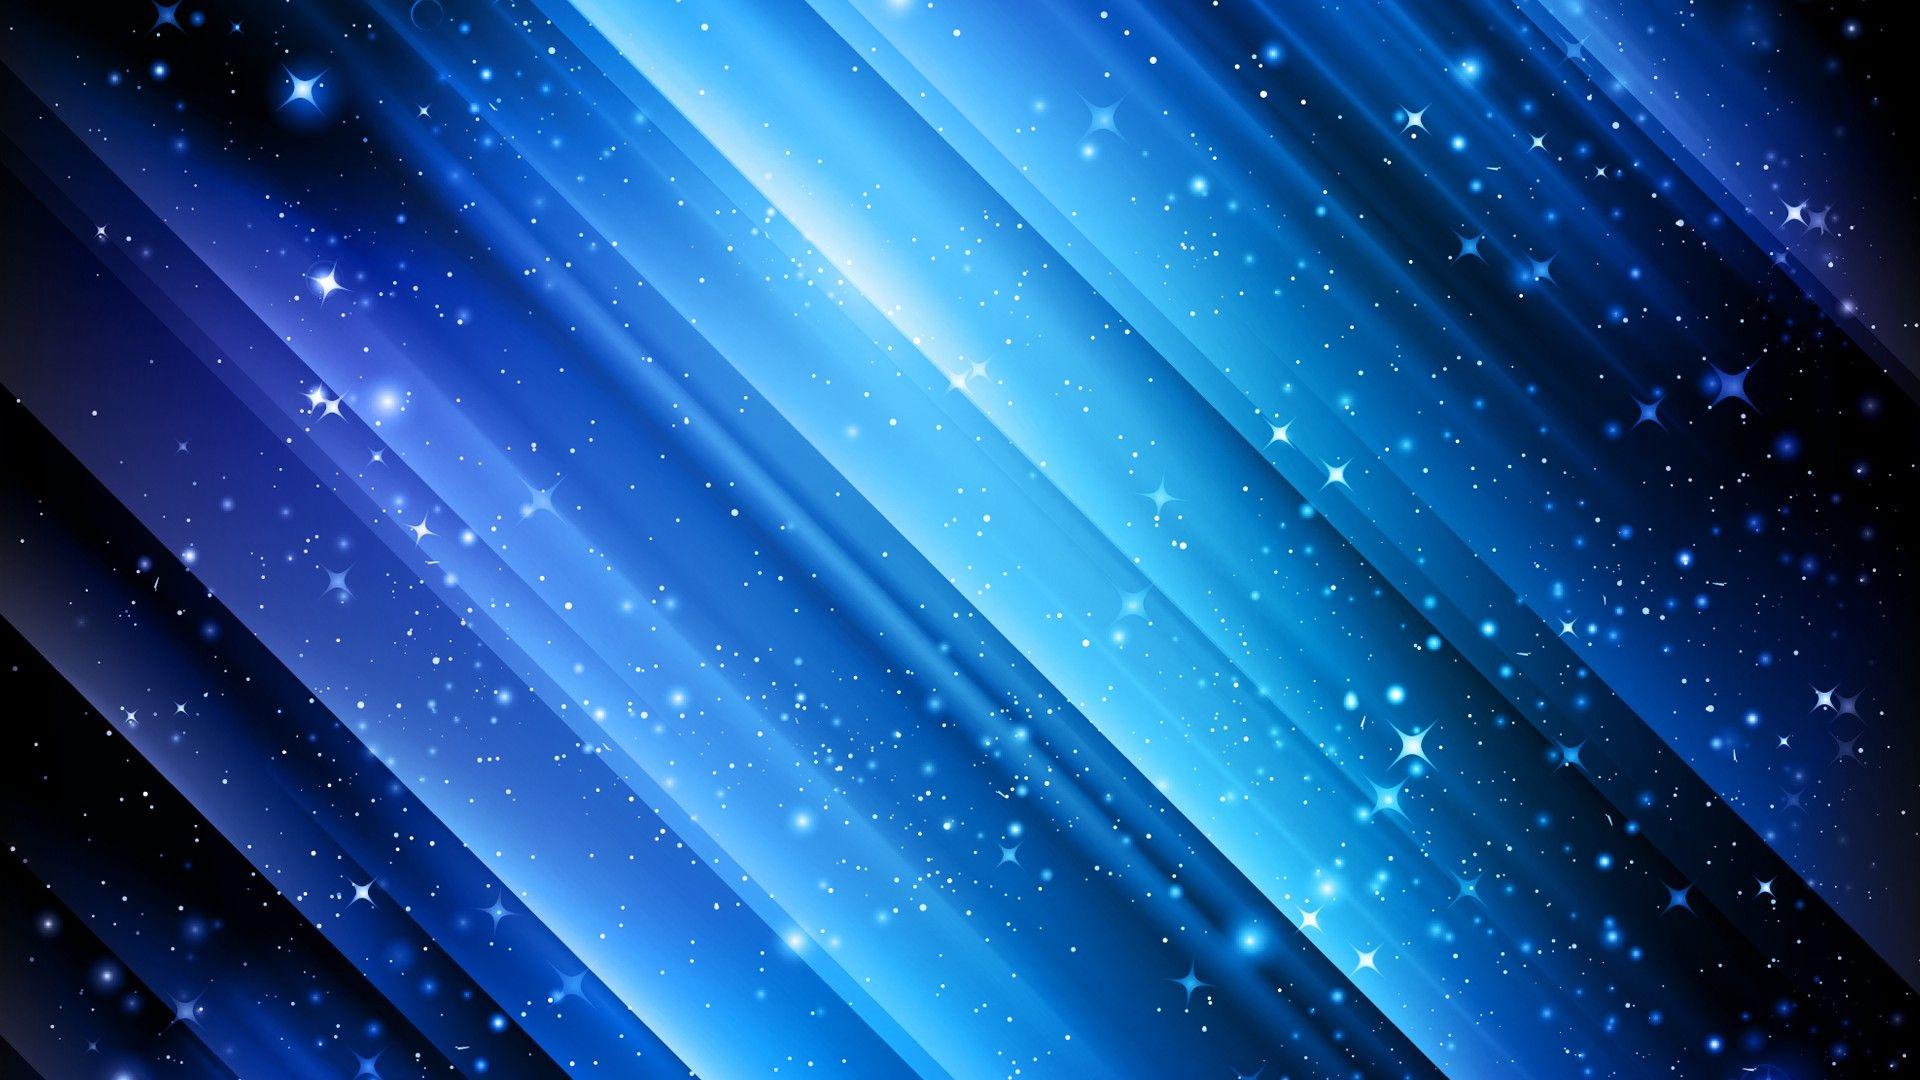 Navy Blue Abstract Wallpapers - Top Free Navy Blue Abstract Backgrounds